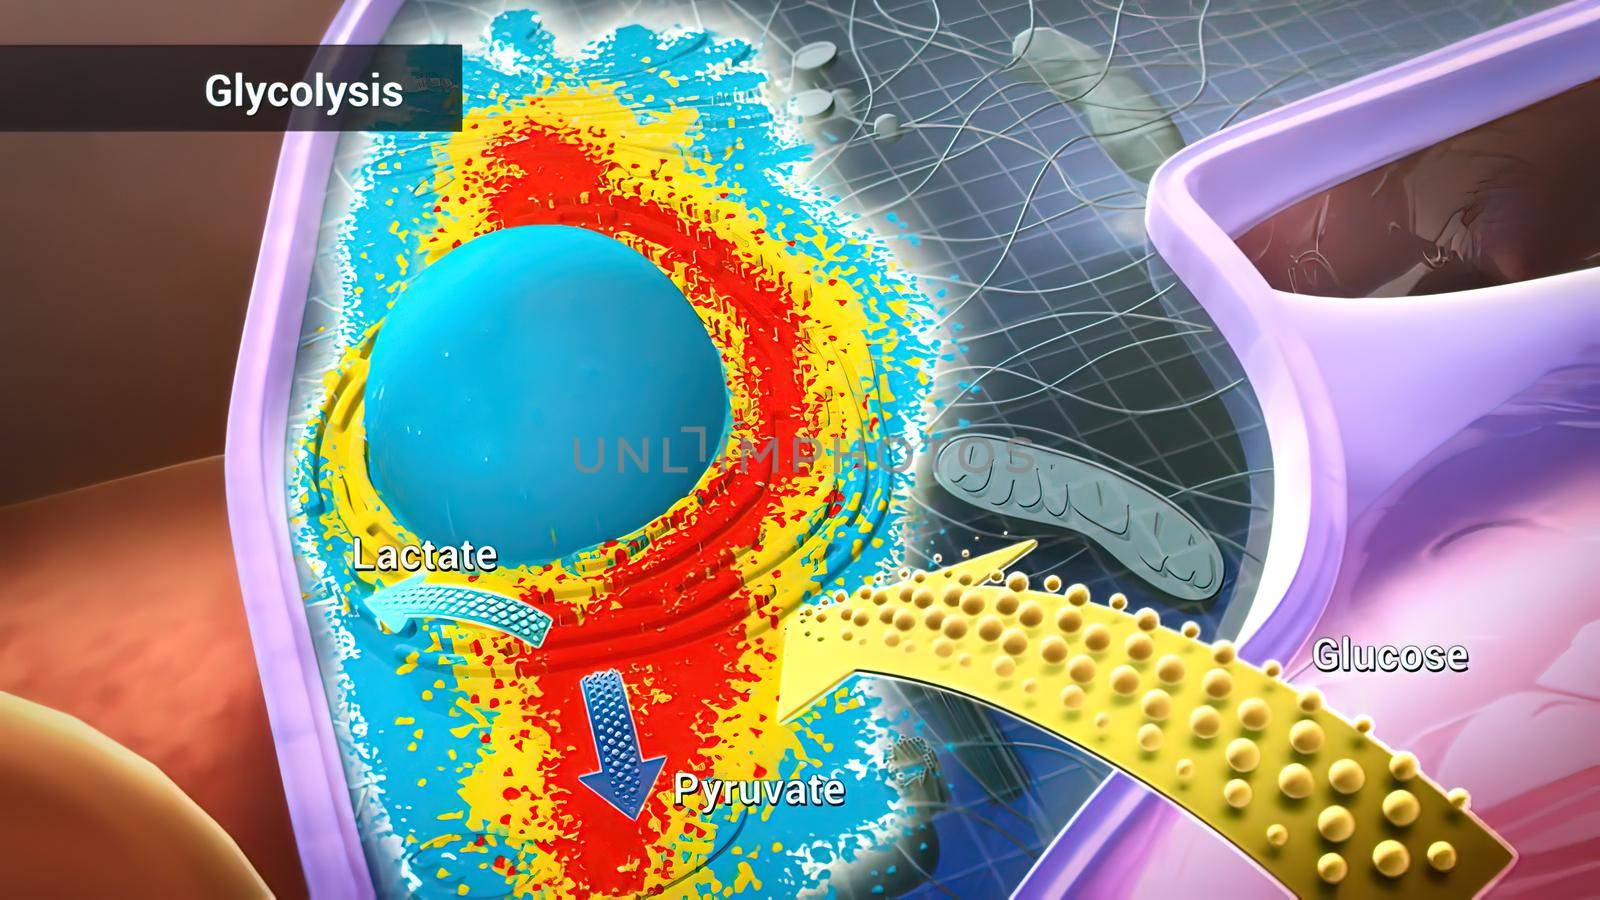 CELL BIOLOGY Most of the functions of organelles, such as mitochondria and the Golgi apparatus 3D illustration